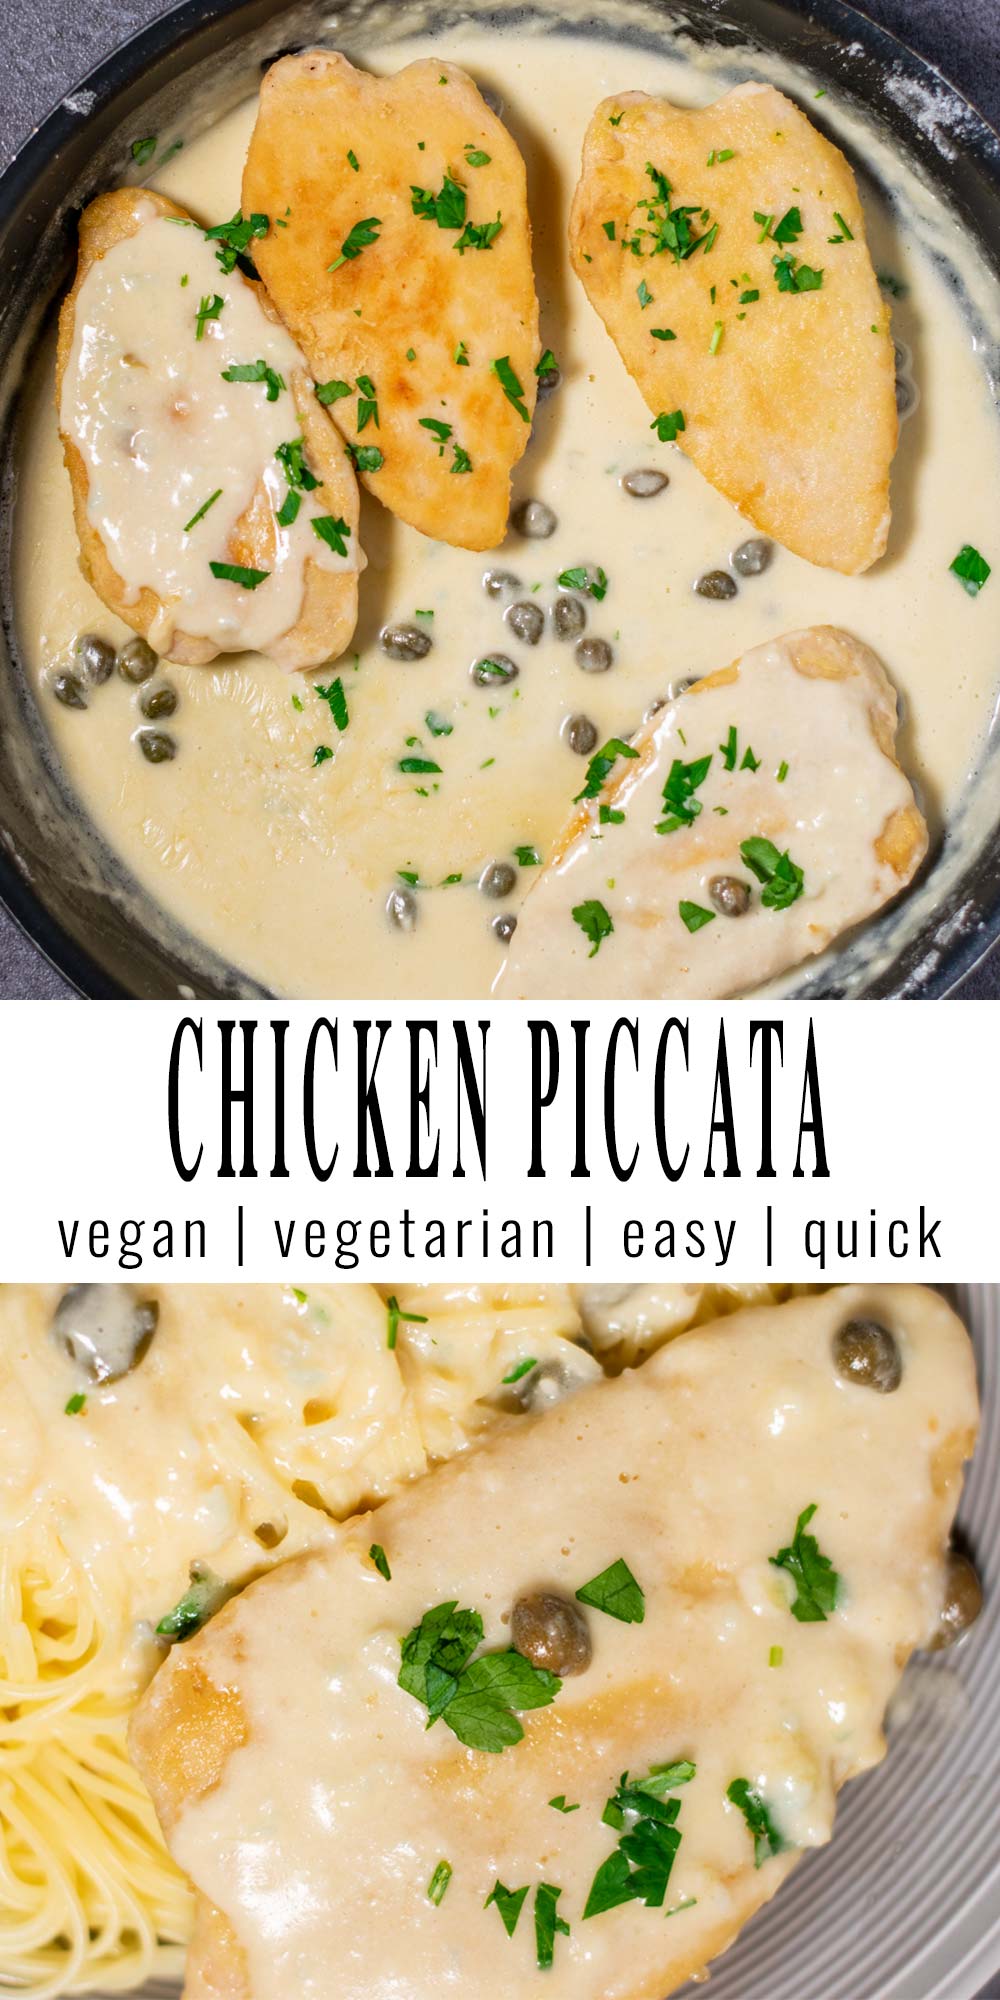 Collage of two pictures of the Chicken Piccata with recipe title text.